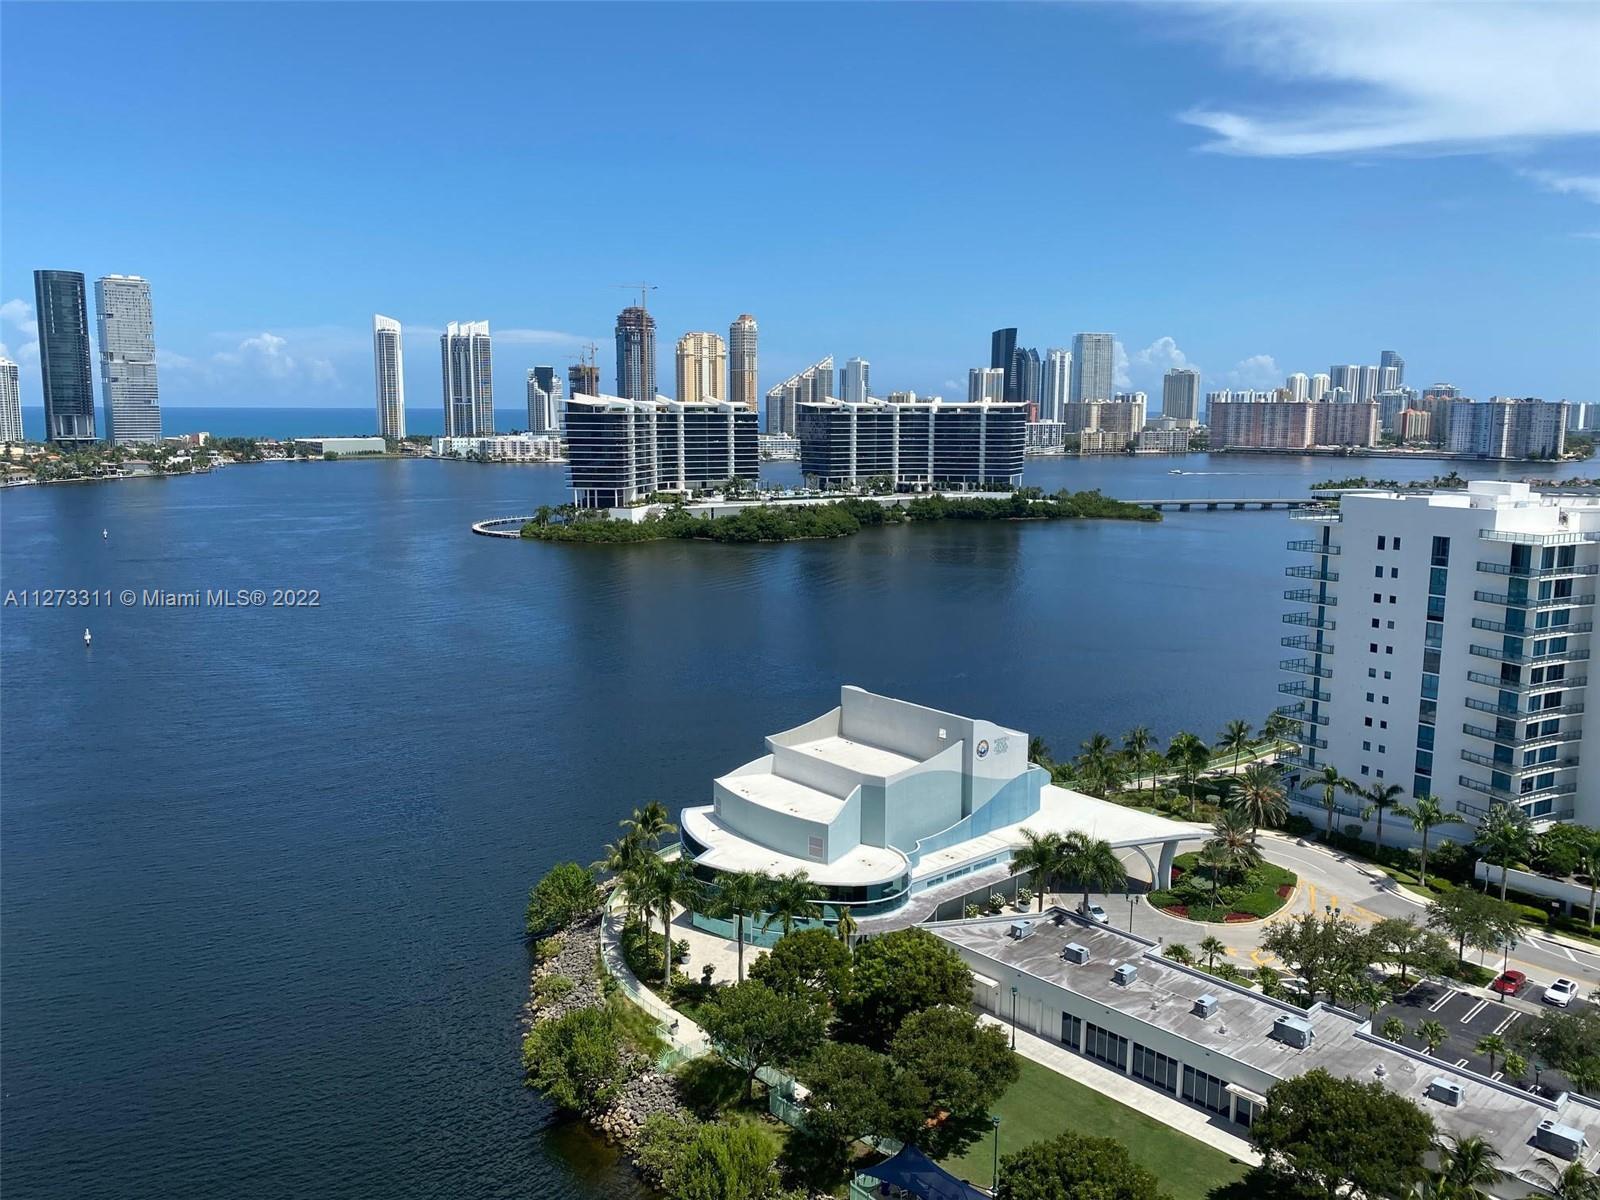 Luxury waterfront 3 Bedrooms - 3 Full Bathrooms residence at Aventura Marina, centrally located at t